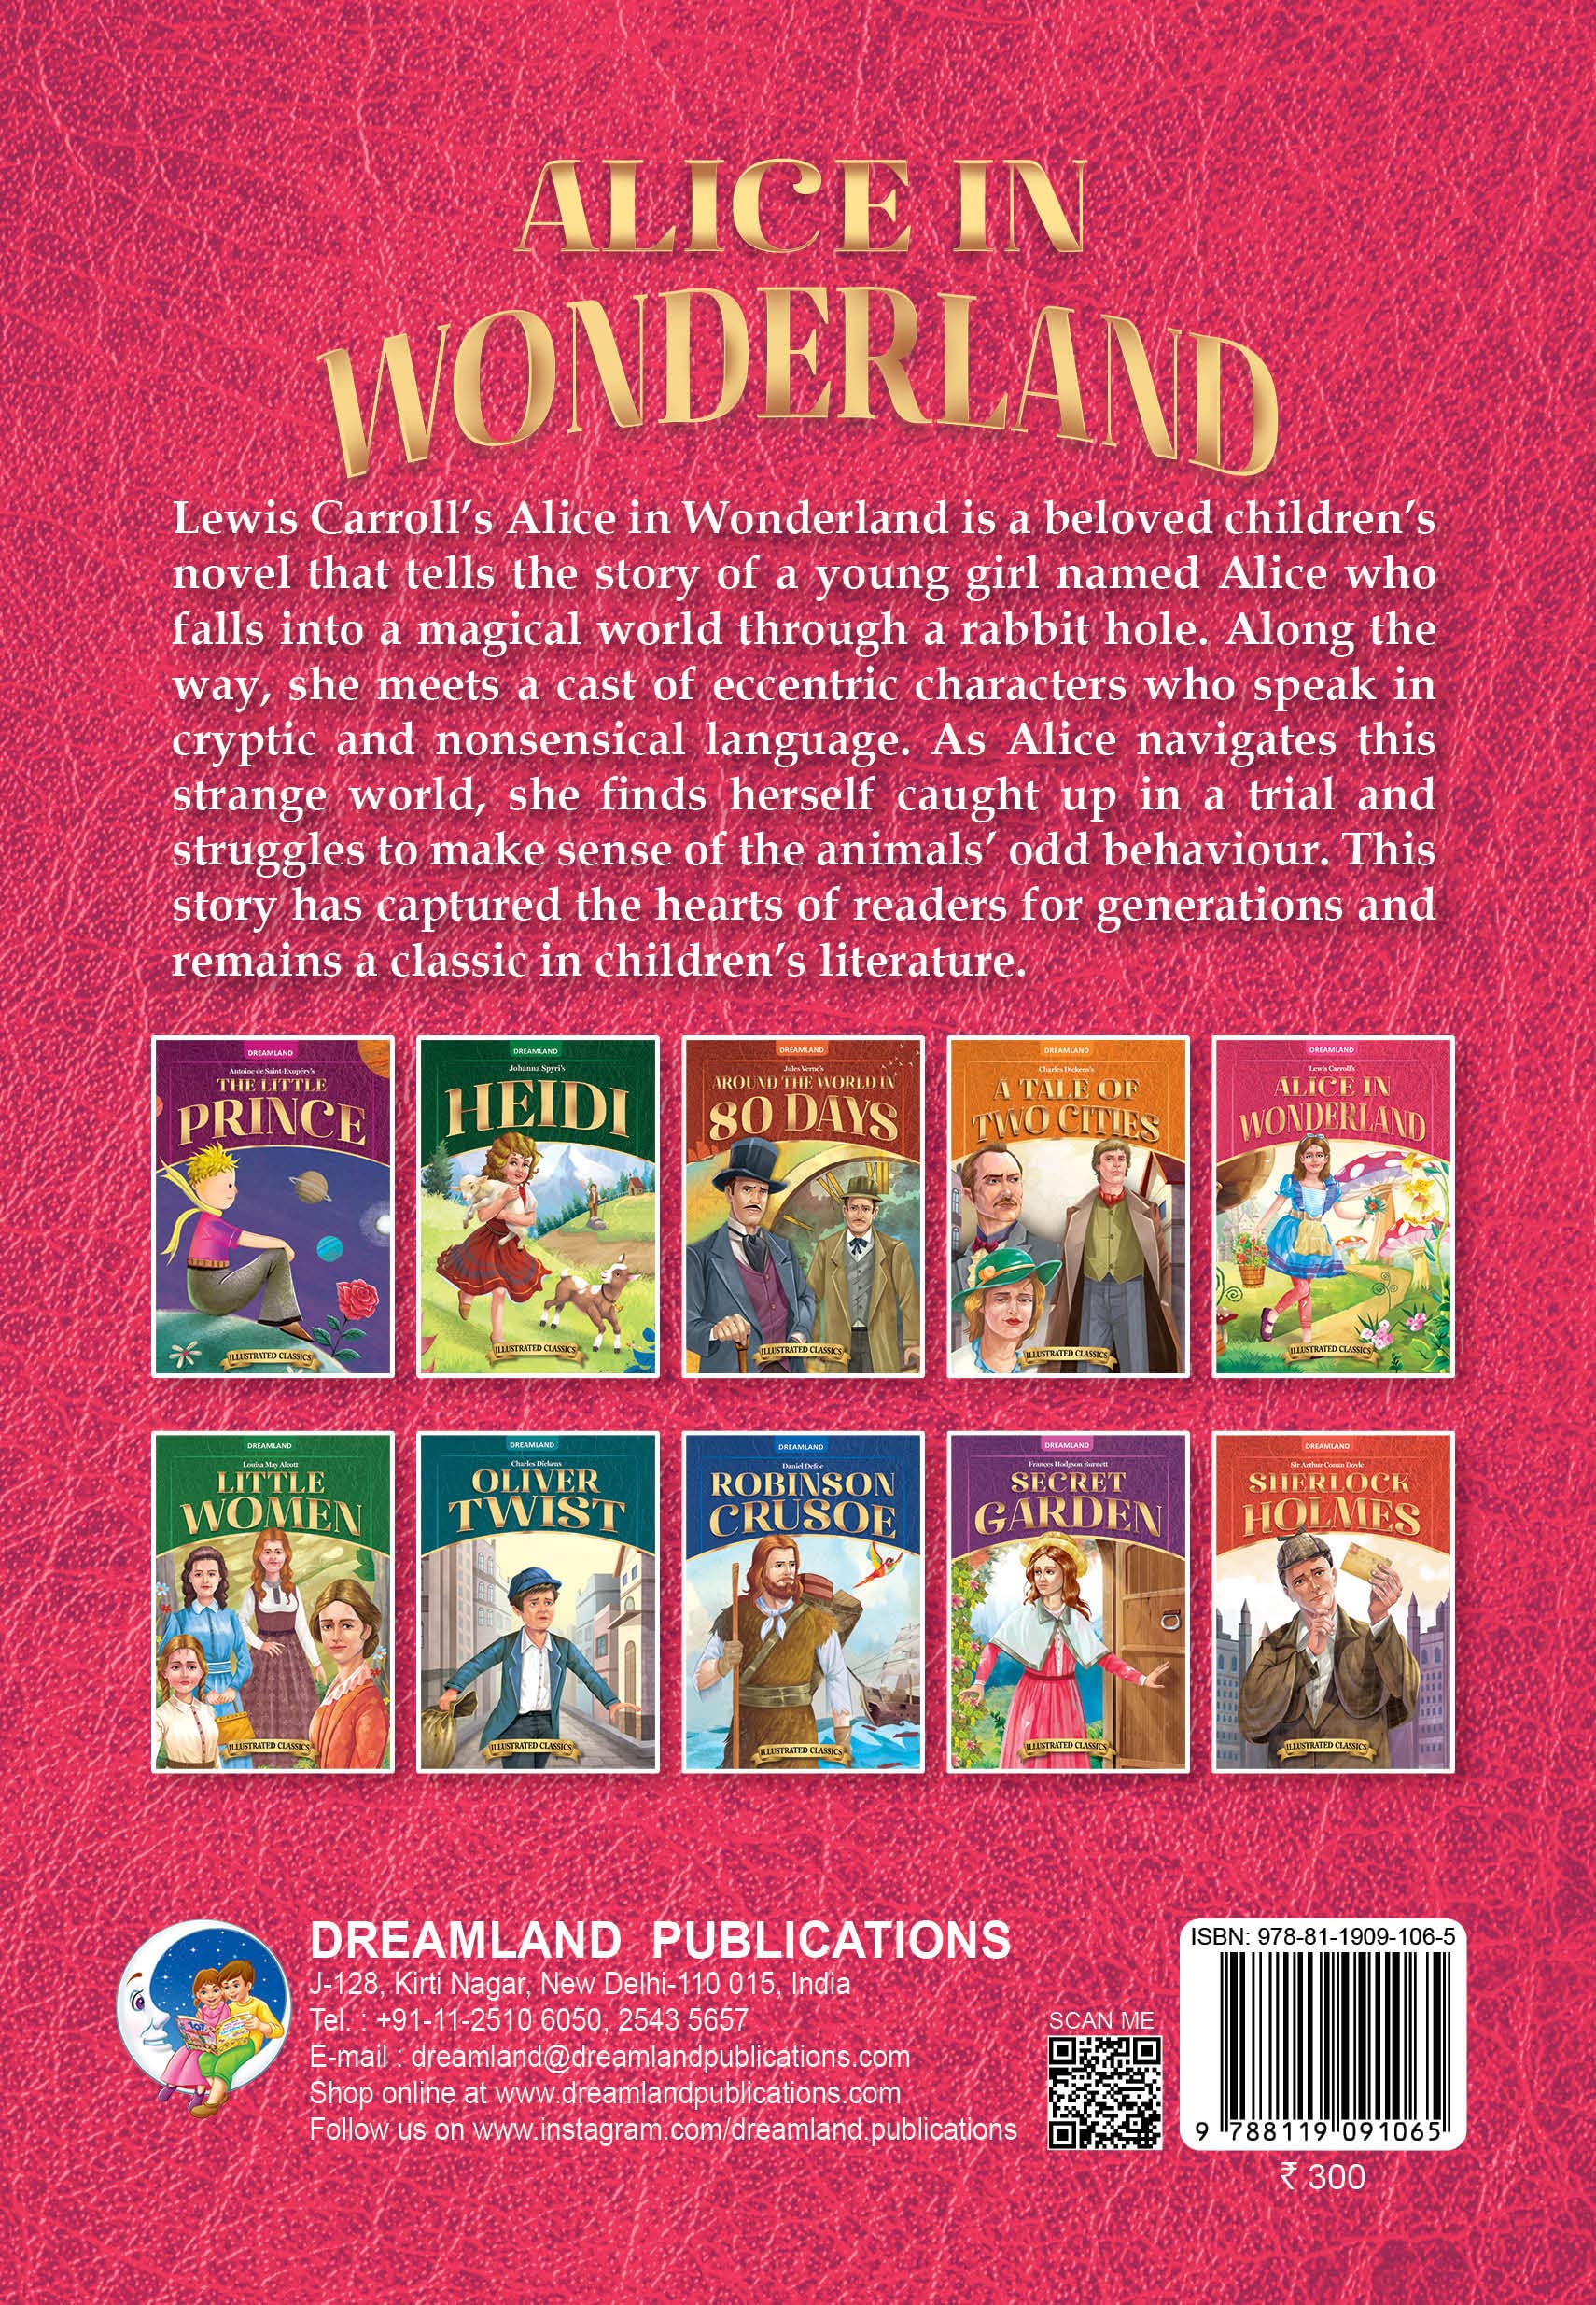 Dreamland Classic Tales Alice In Wonderland - llustrated Abridged Classics for Children with Practice Questions